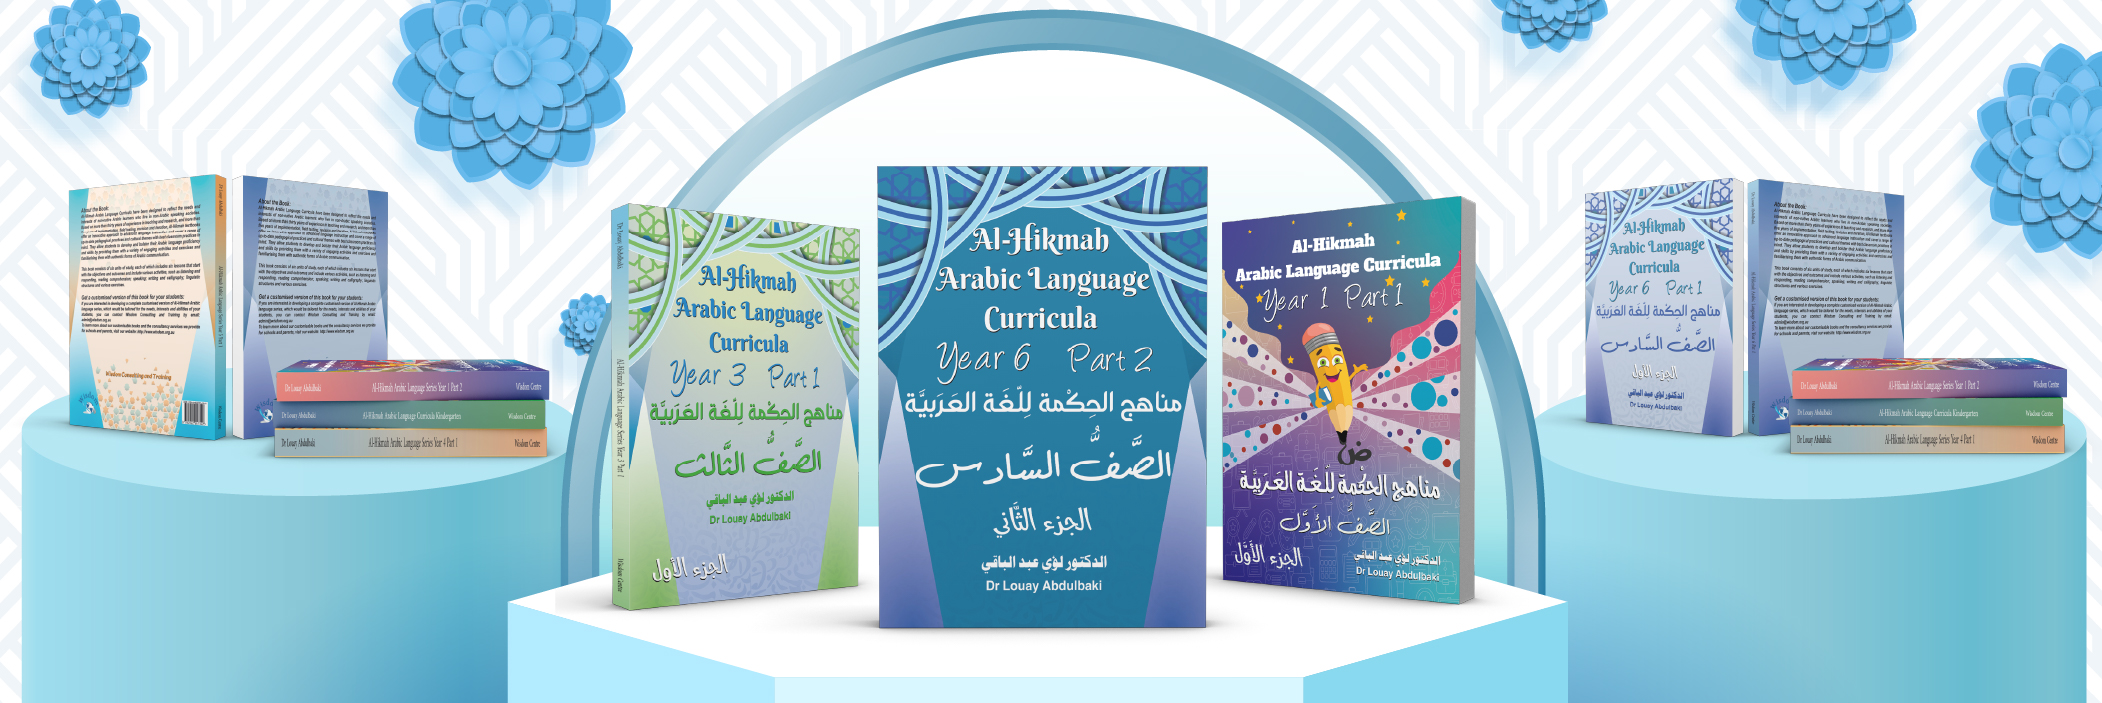  A range of textbooks for teaching Arabic as a foreign language, with a focus on developing students' reading, writing, listening, and speaking skills.